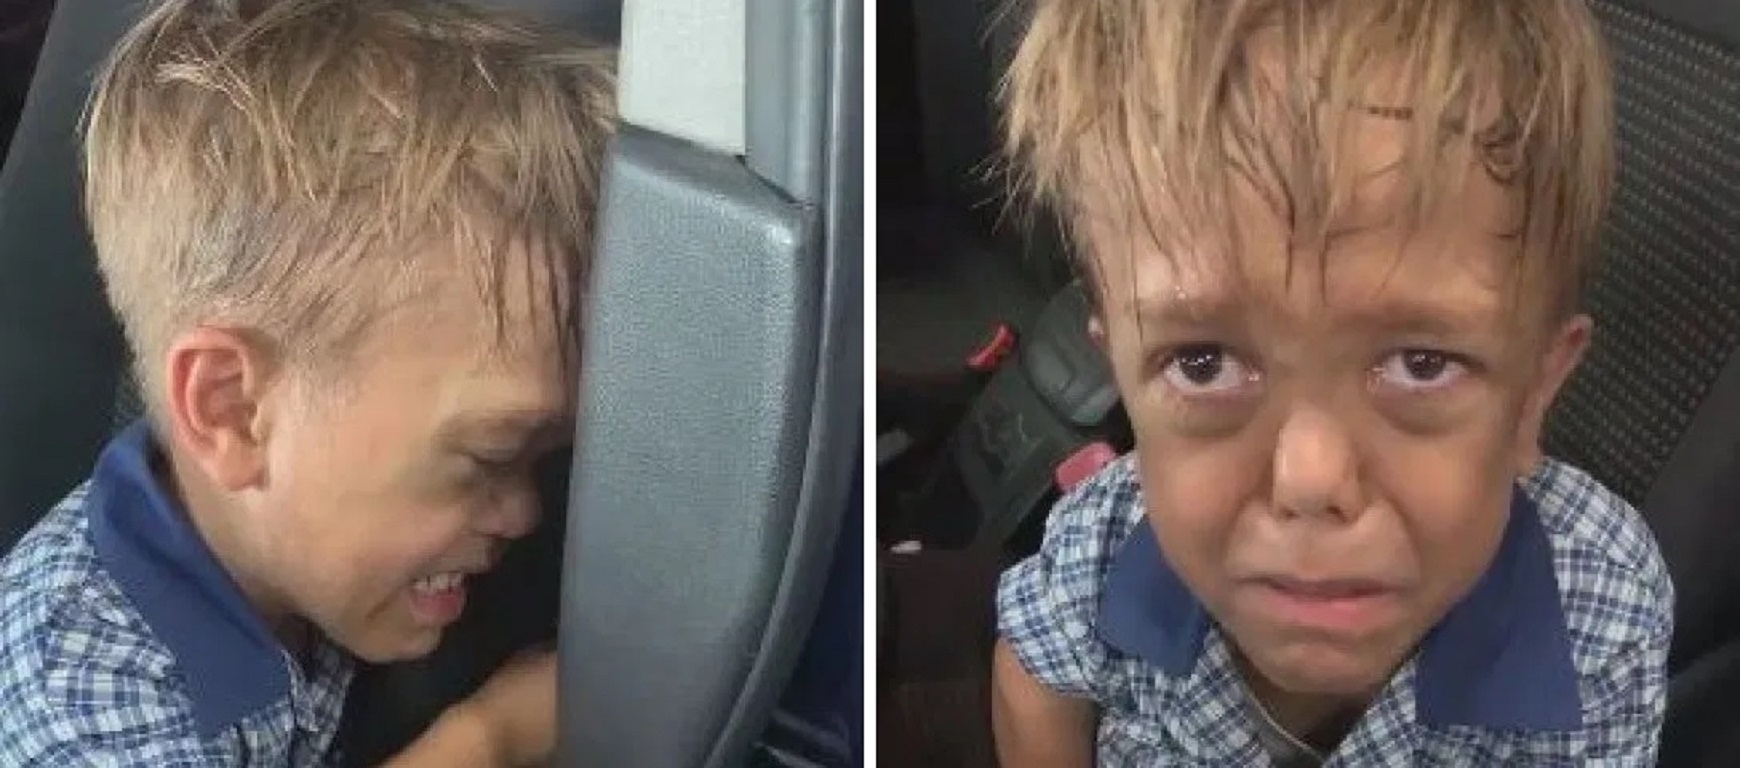 9 Year Old Boy Talks About ‘Killing Himself’ After Being Bullied in School For Dwarfism